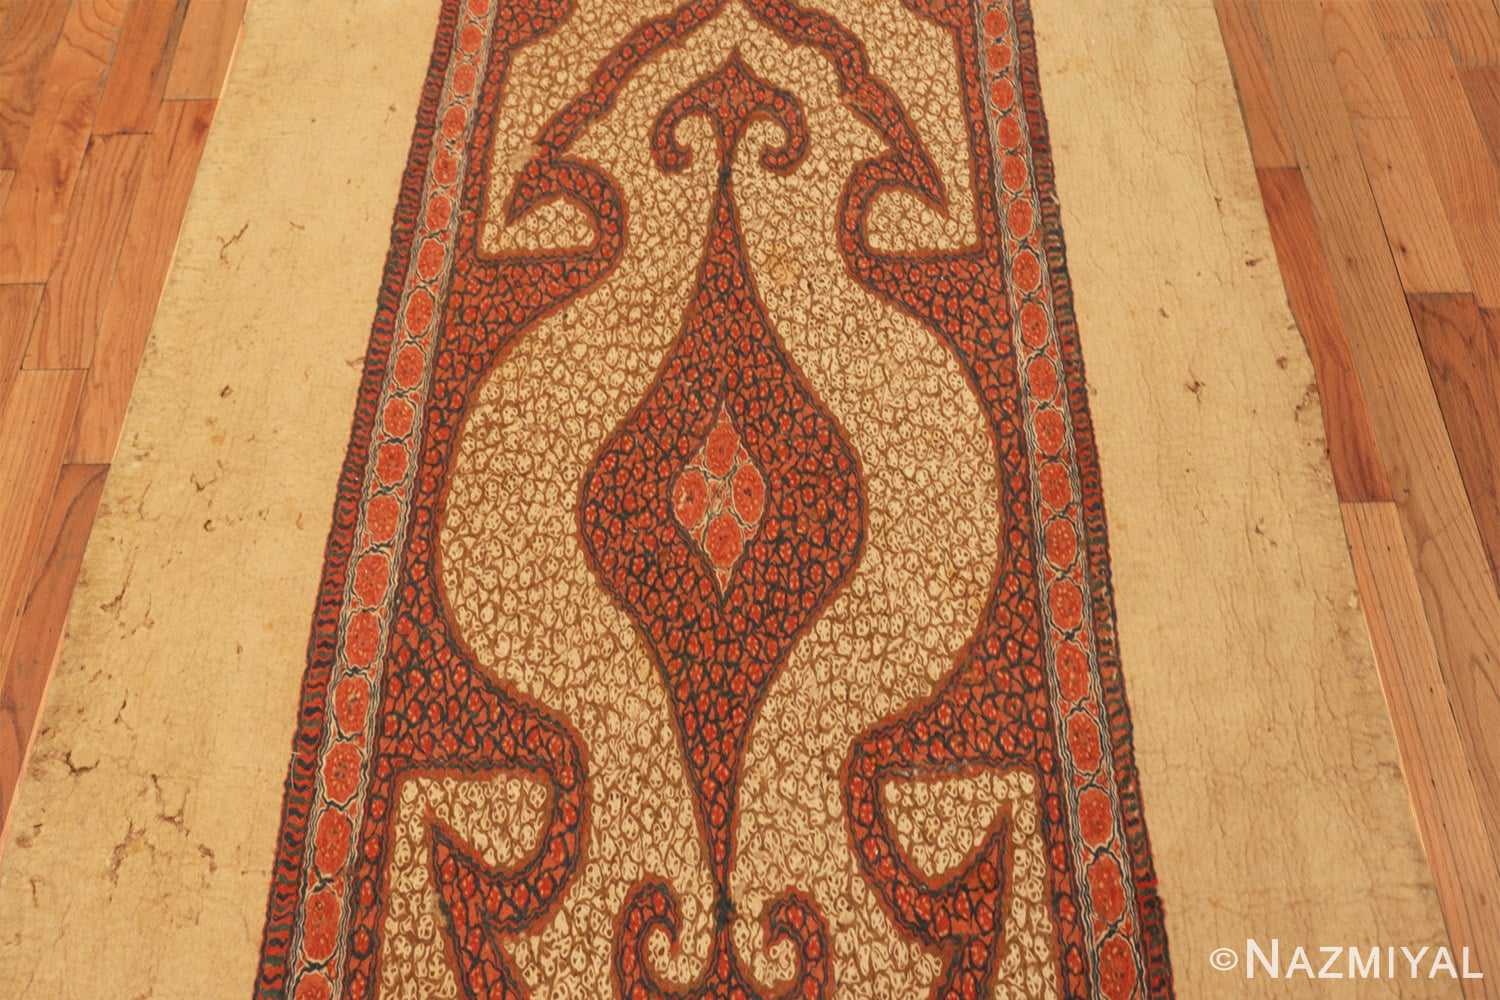 Field Antique Central Asia felt rug 41408 by Nazmiyal